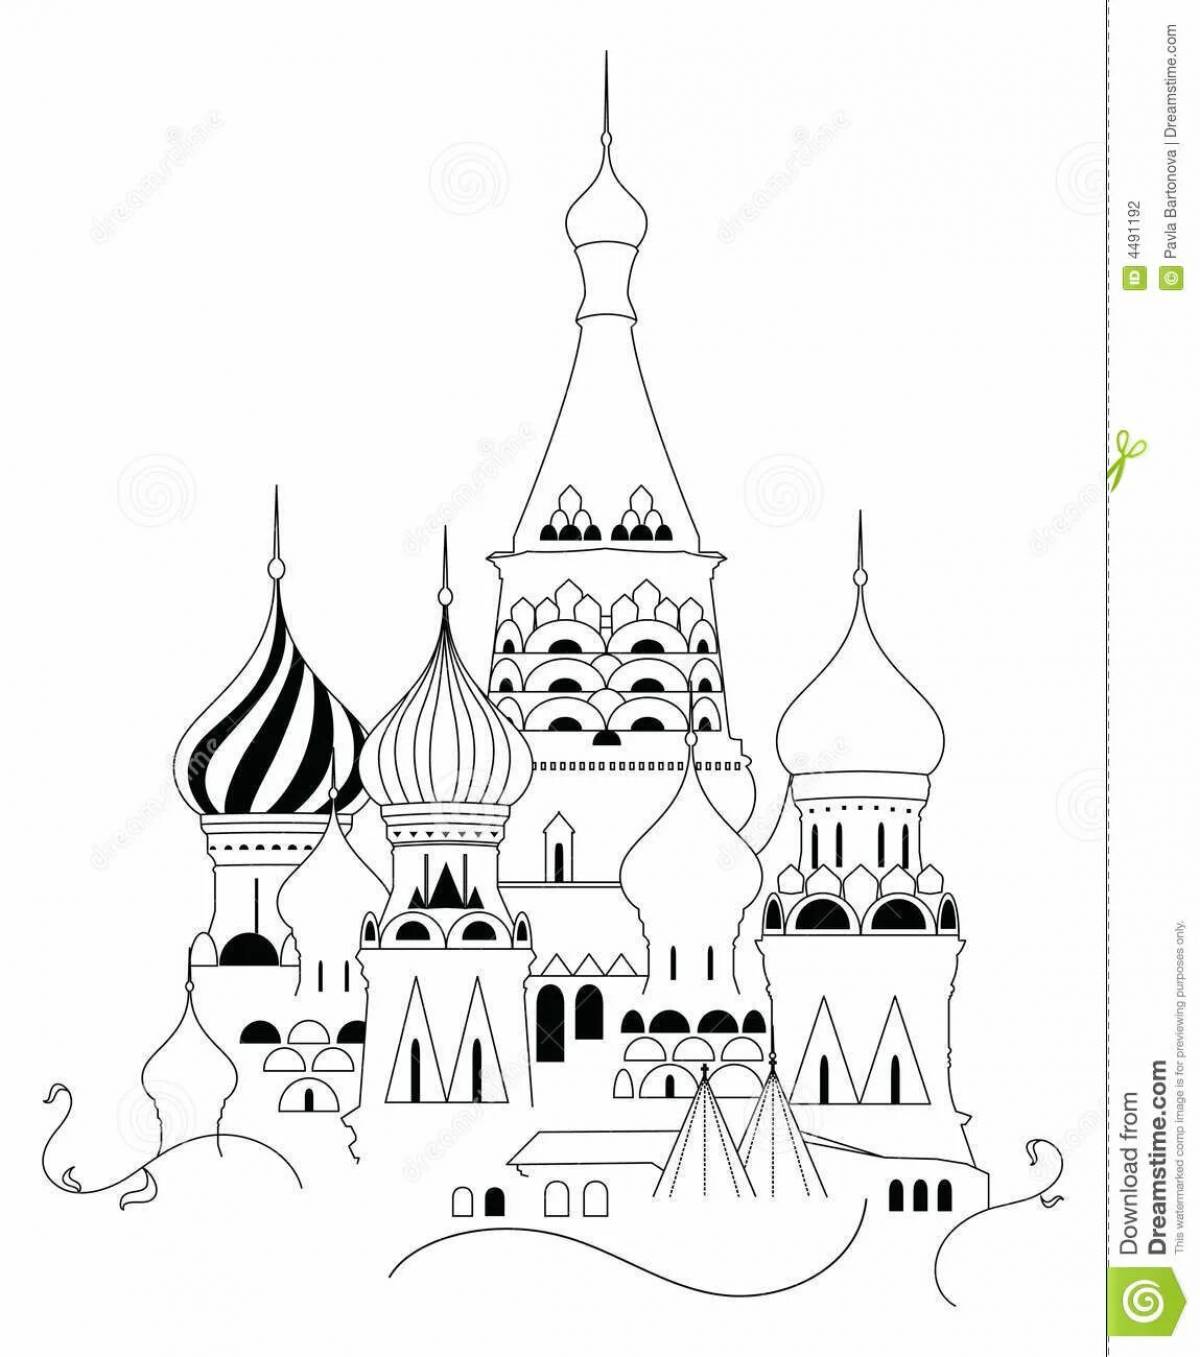 St. Basil's Cathedral for children #5